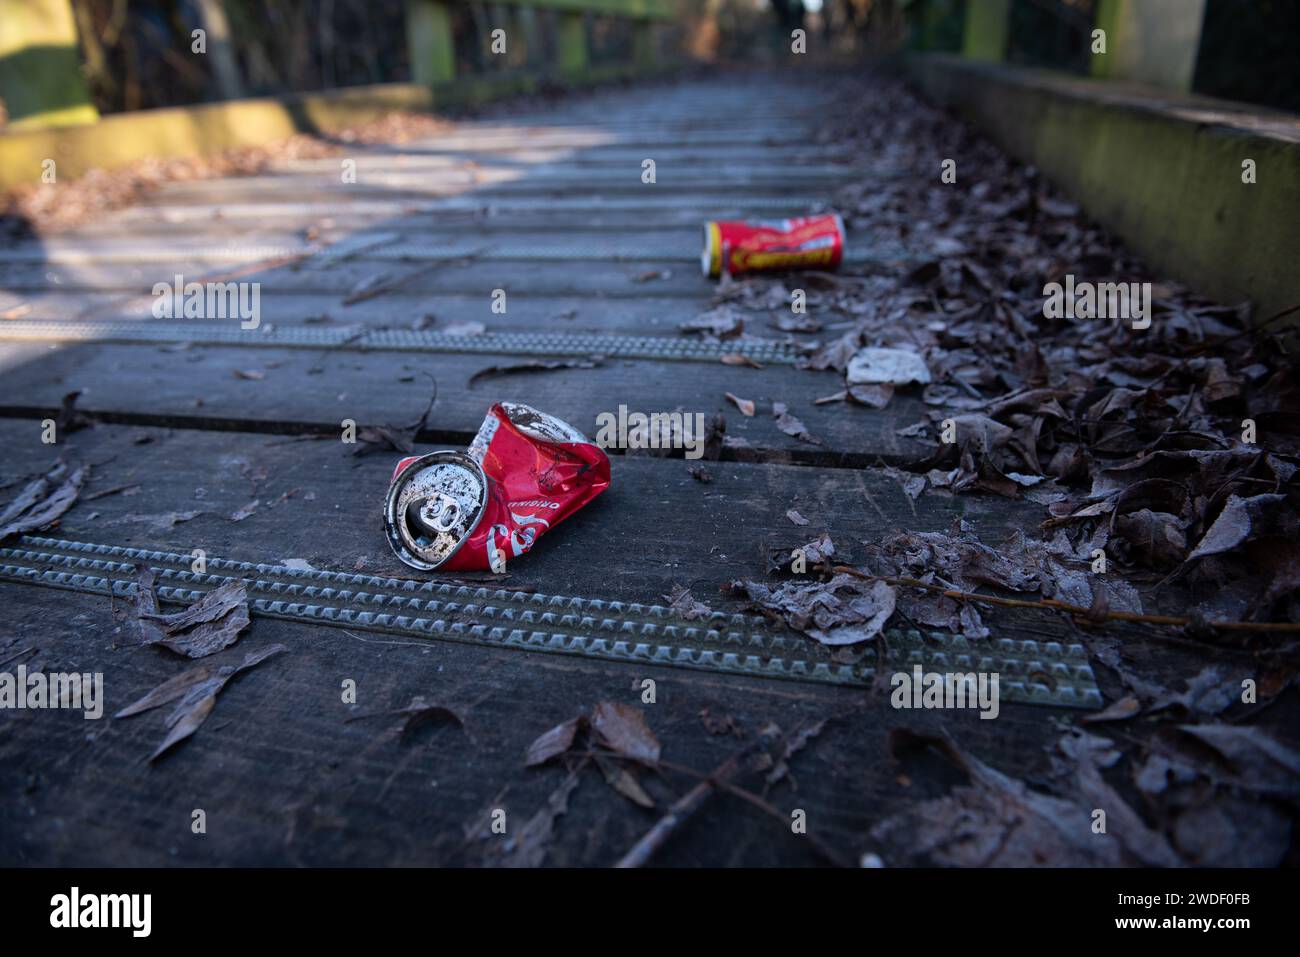 Litter on Countryside Pathway, crumpled cans on ground Stock Photo